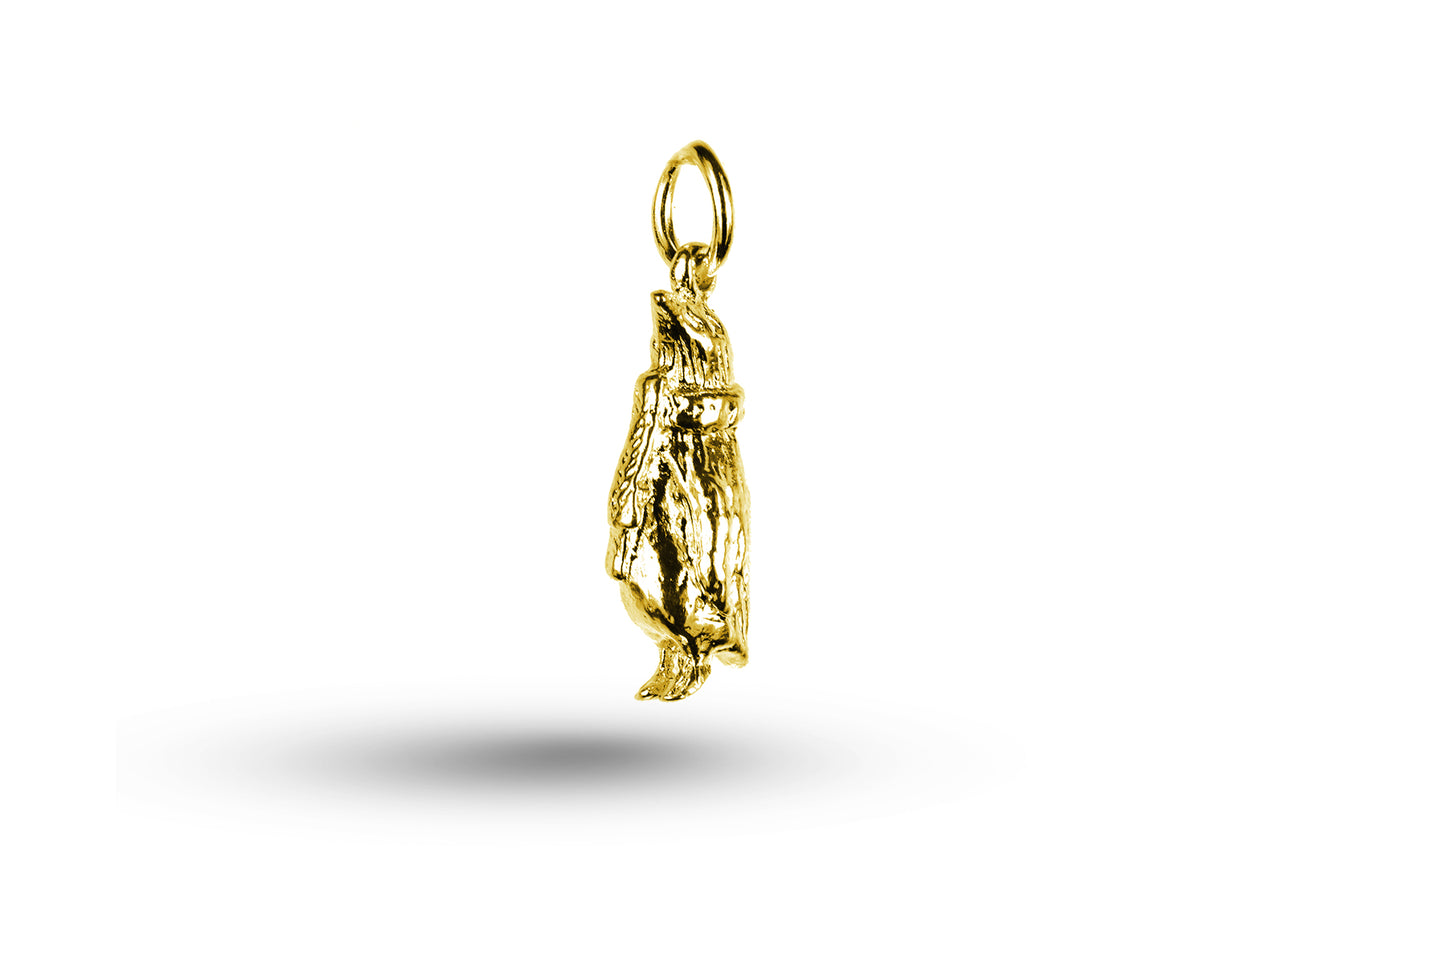 Yellow gold Penguin with Scarf charm.